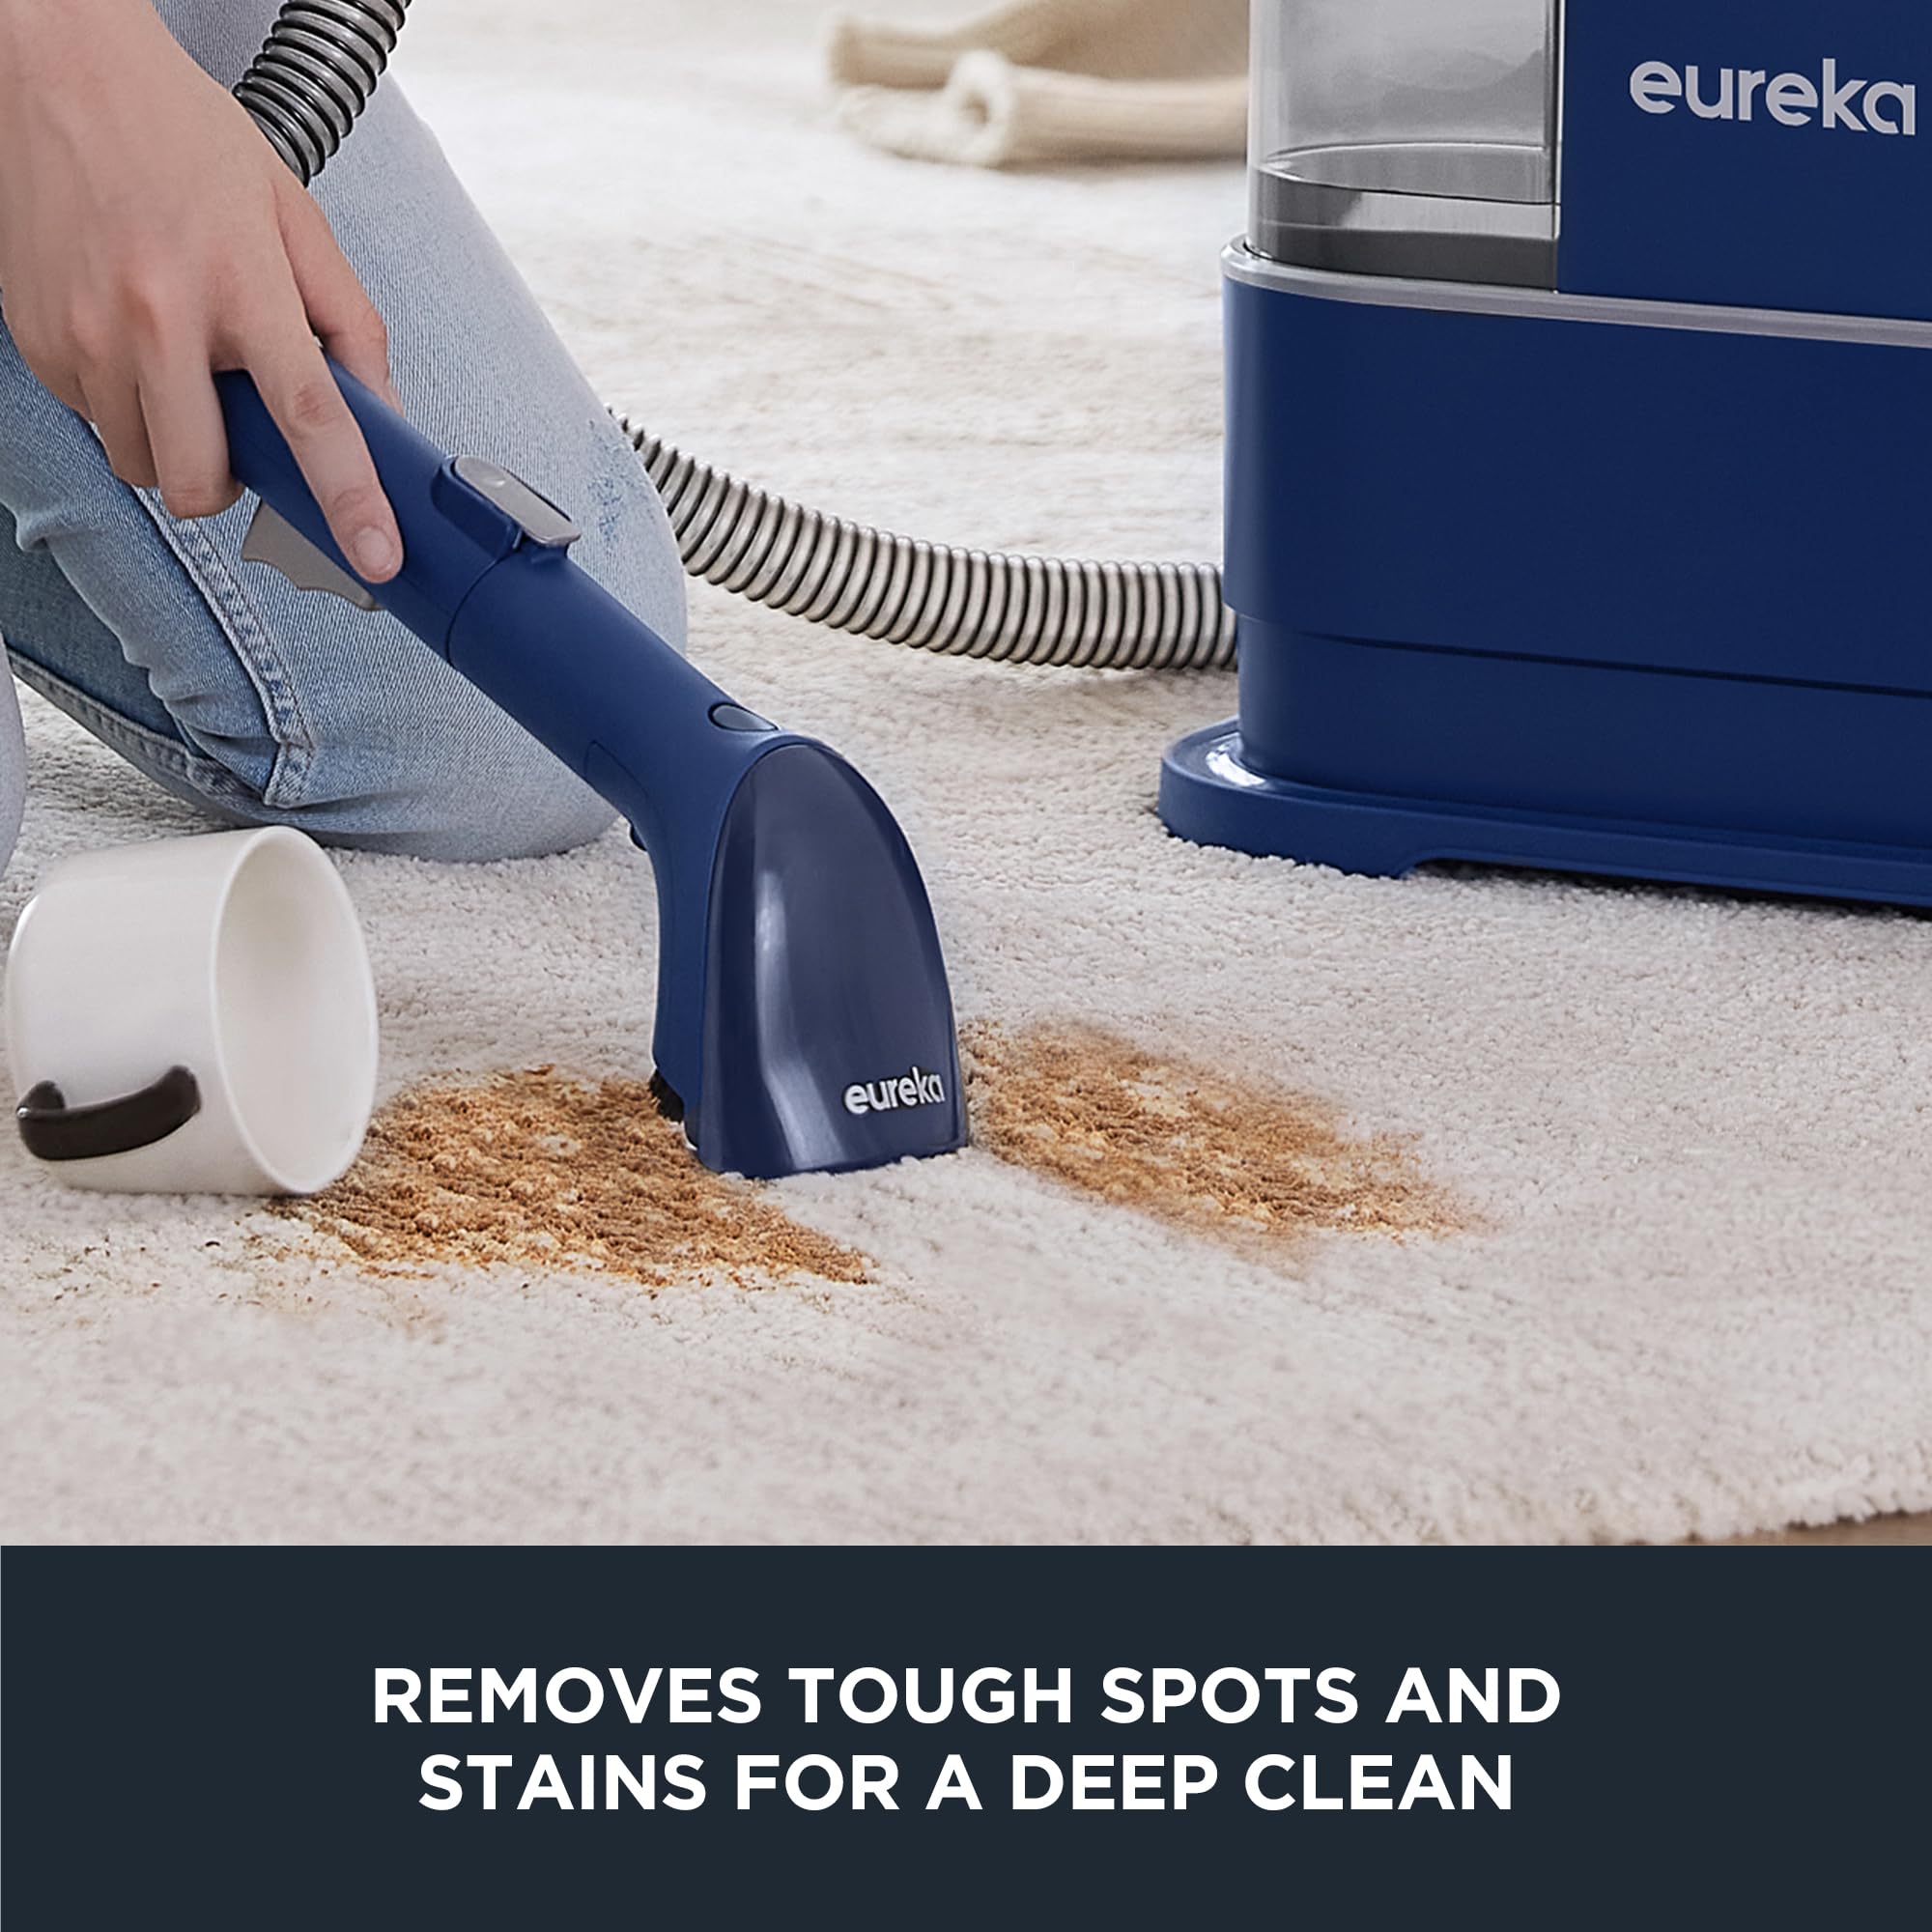 EUREKA Portable Carpet and Upholstery Cleaner, Spot Cleaner for Pets, Stain Remover for Carpet, Area Rugs, Upholstery, Coaches and Car, 50.7oz Large Water Tank, NEY100 with Cleaning Formula, Blue